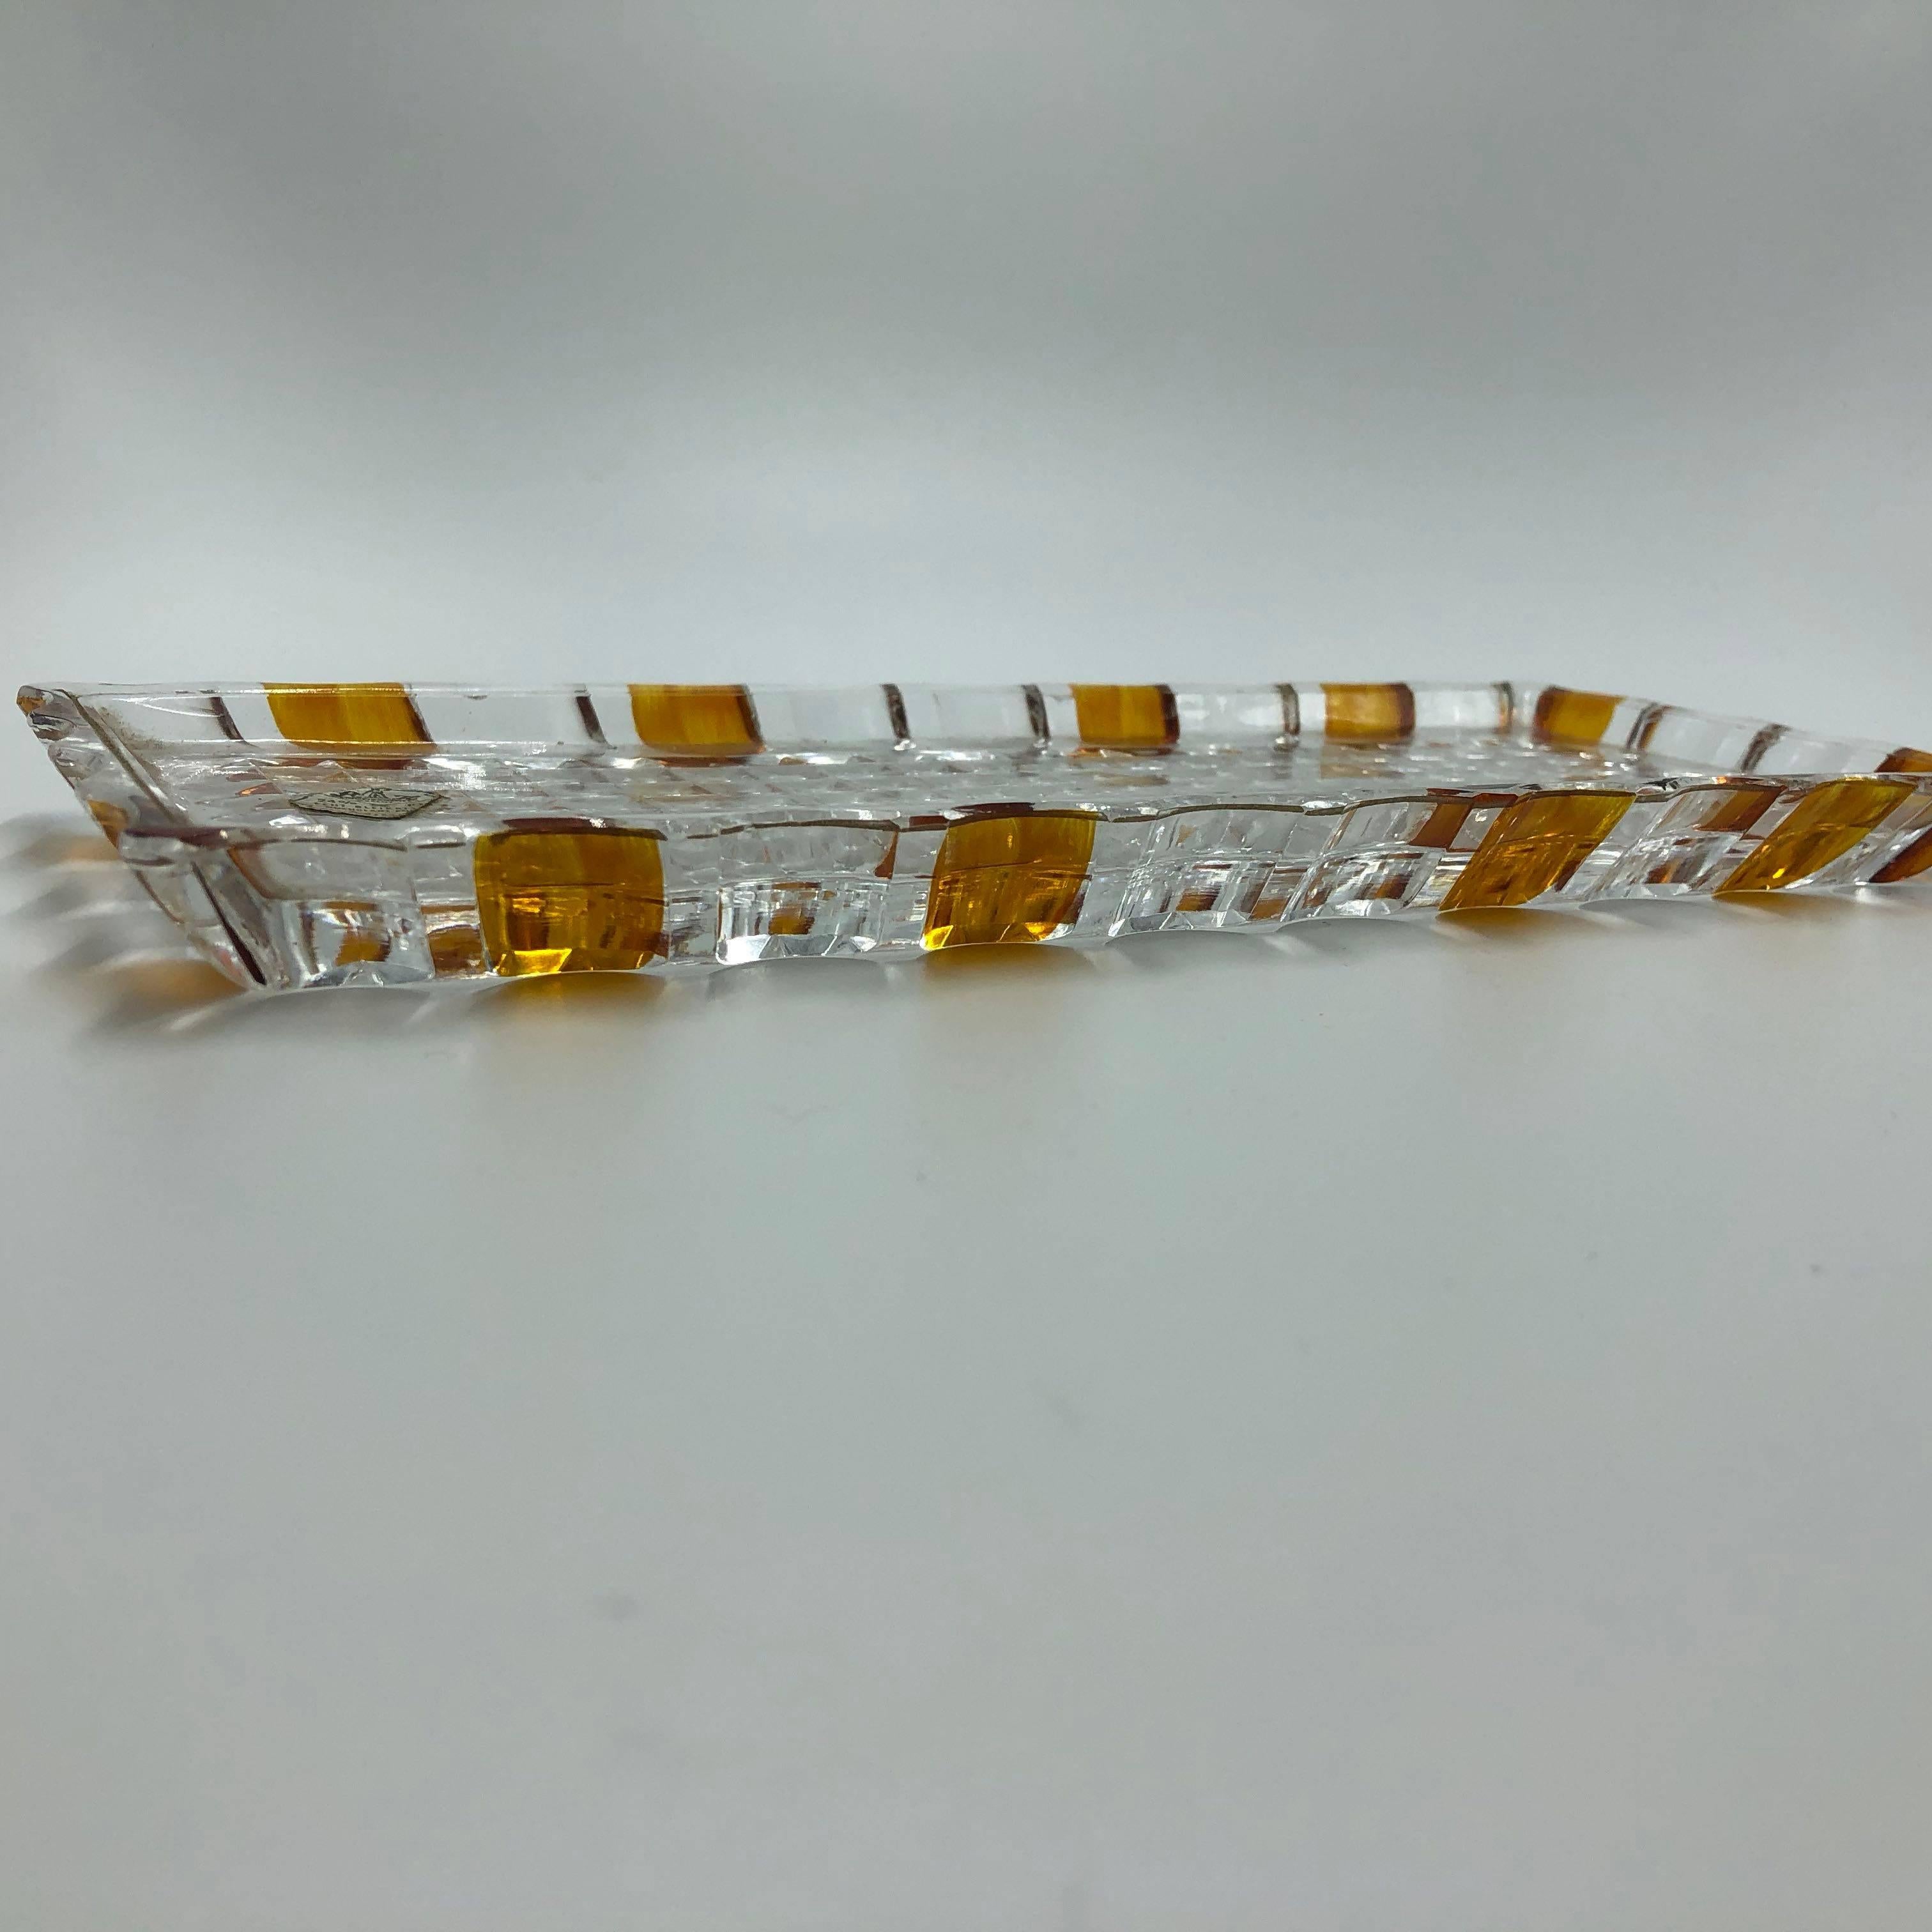 Mid-20th Century Vintage West Germany Echt Bleikristall Lead Crystal Golden Amber Jewelry Tray For Sale